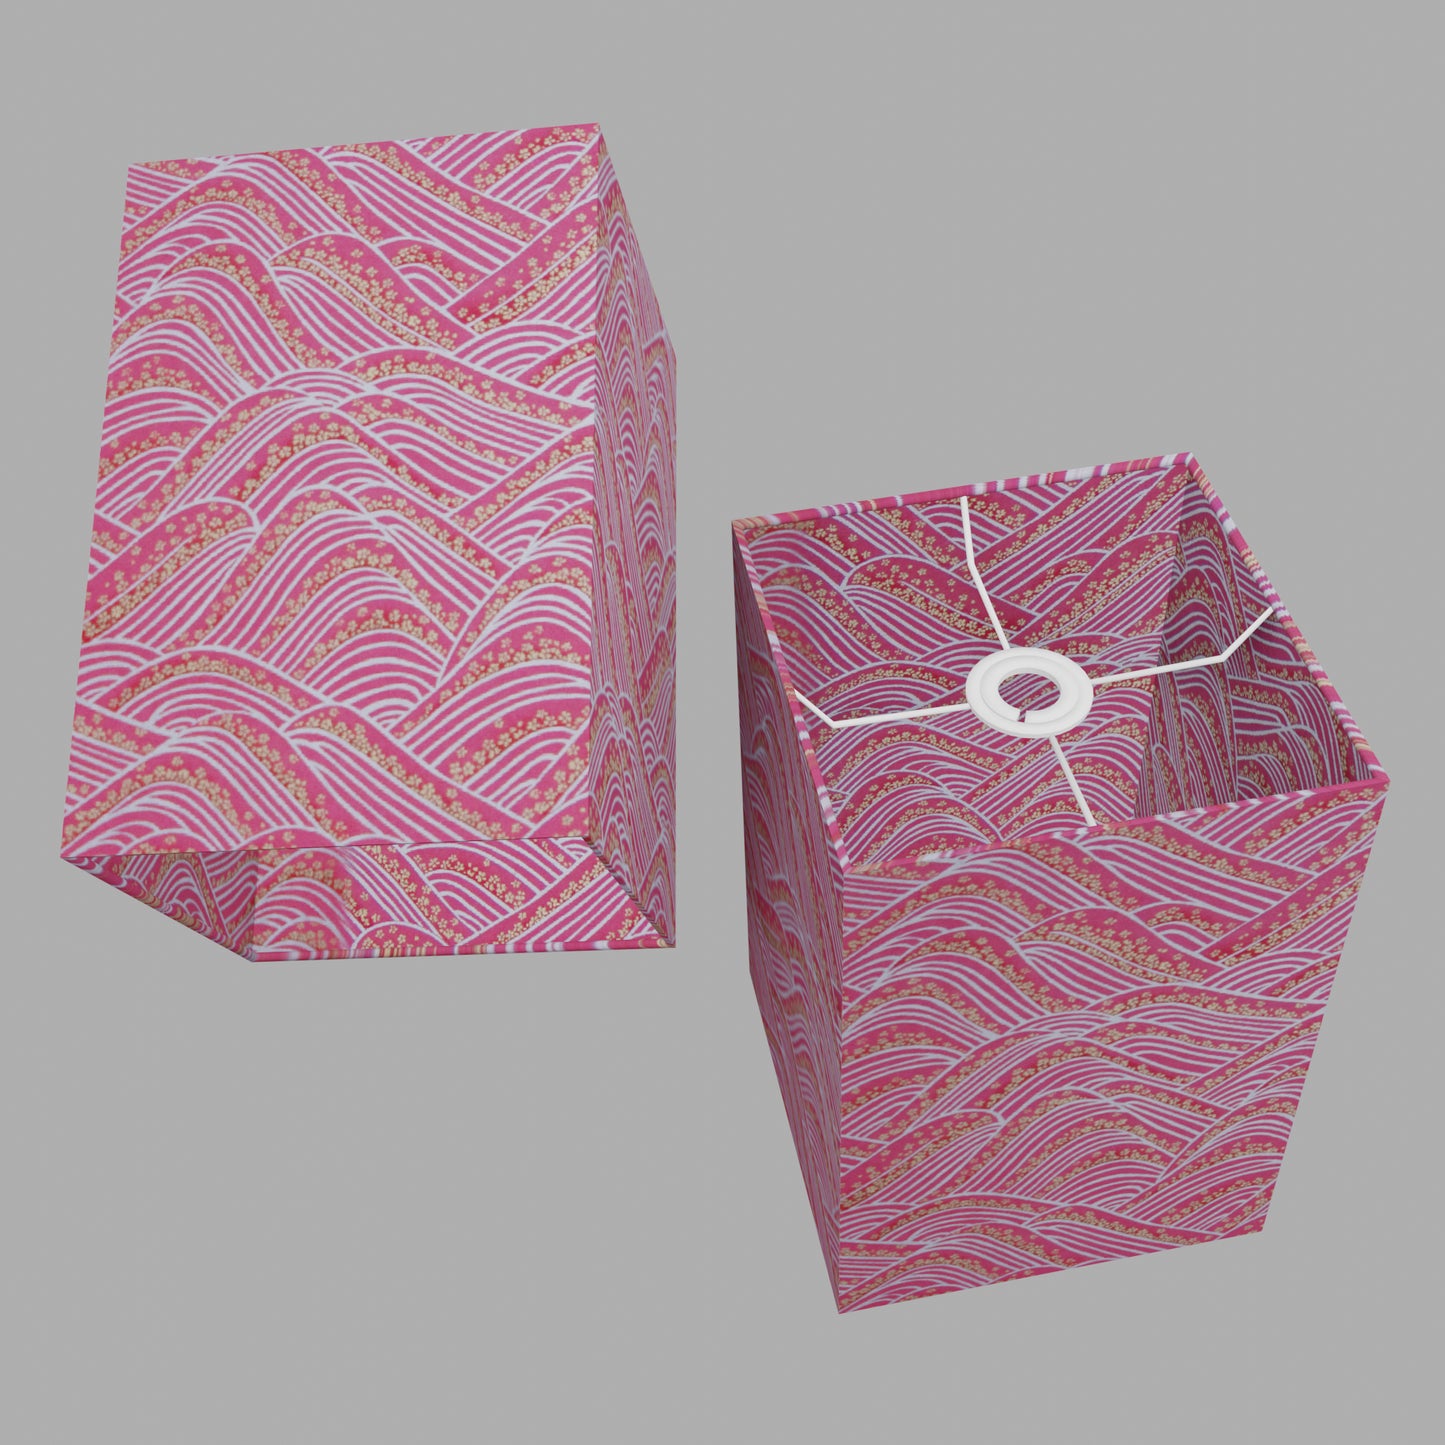 Square Lamp Shade - W04 ~ Pink Hills with Gold Flowers, 20cm(w) x 30cm(h) x 20cm(d)